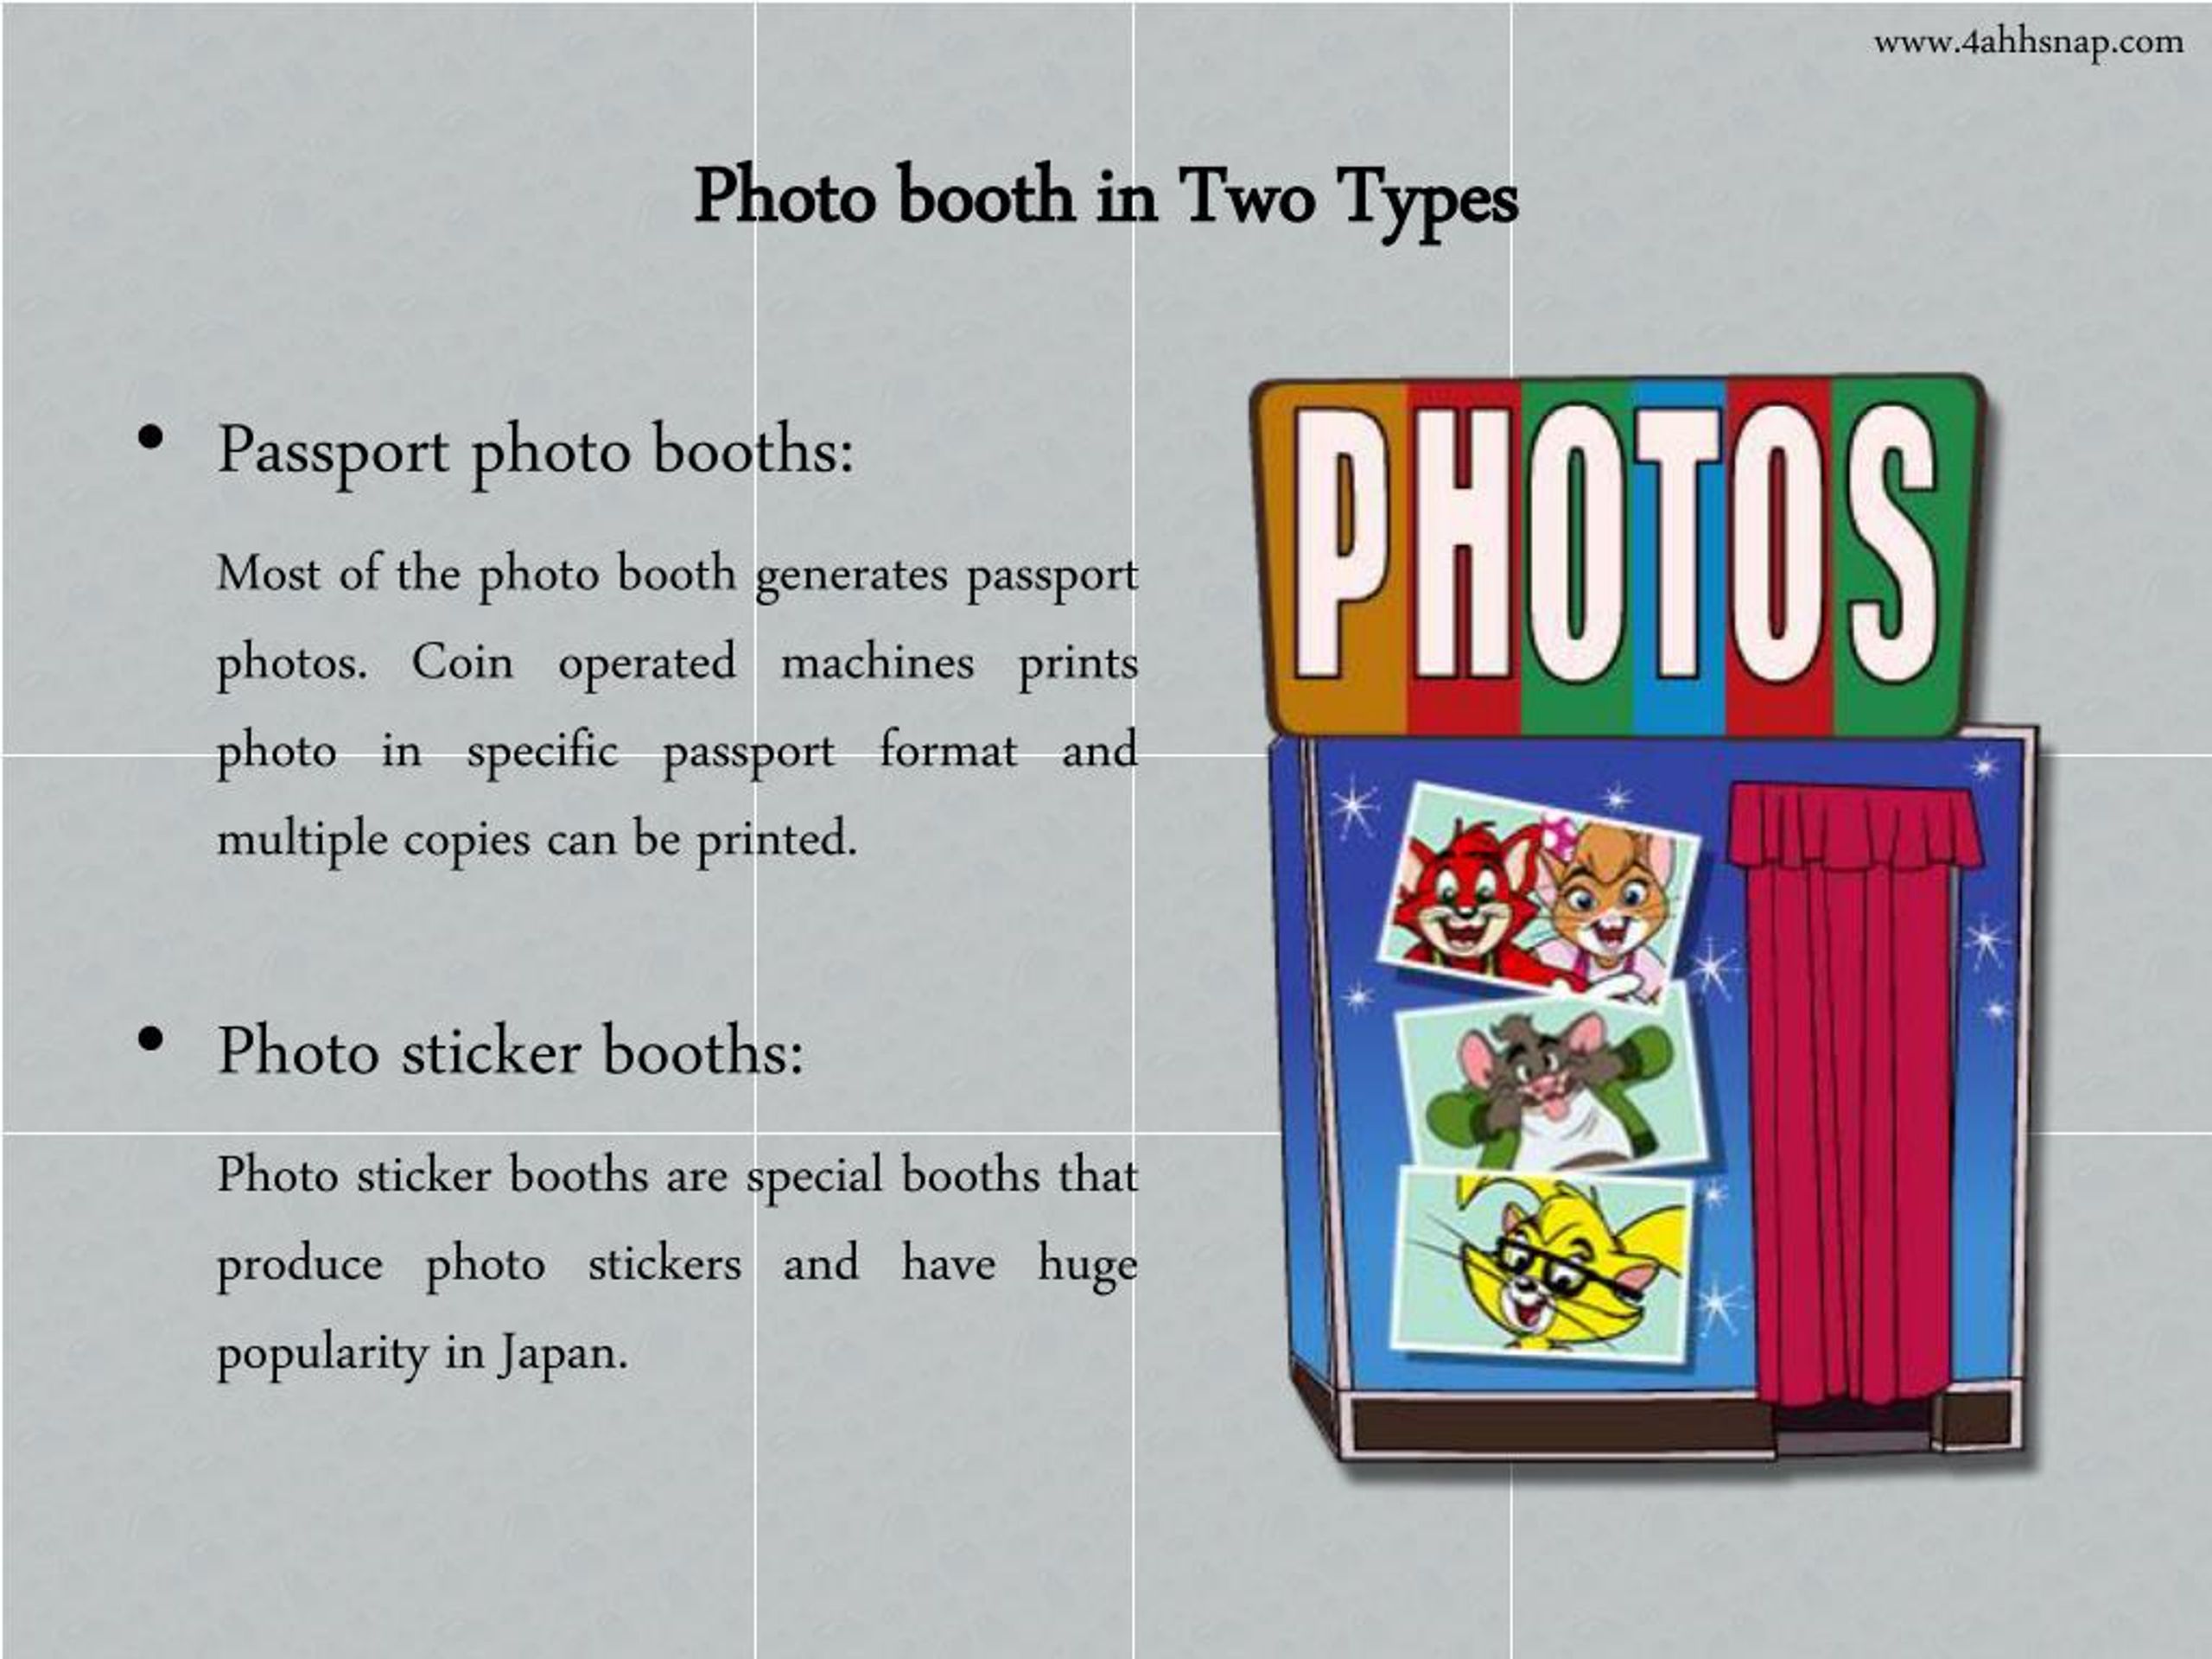 Photo Booth - What is Photo Booth? Definition, Types, Uses